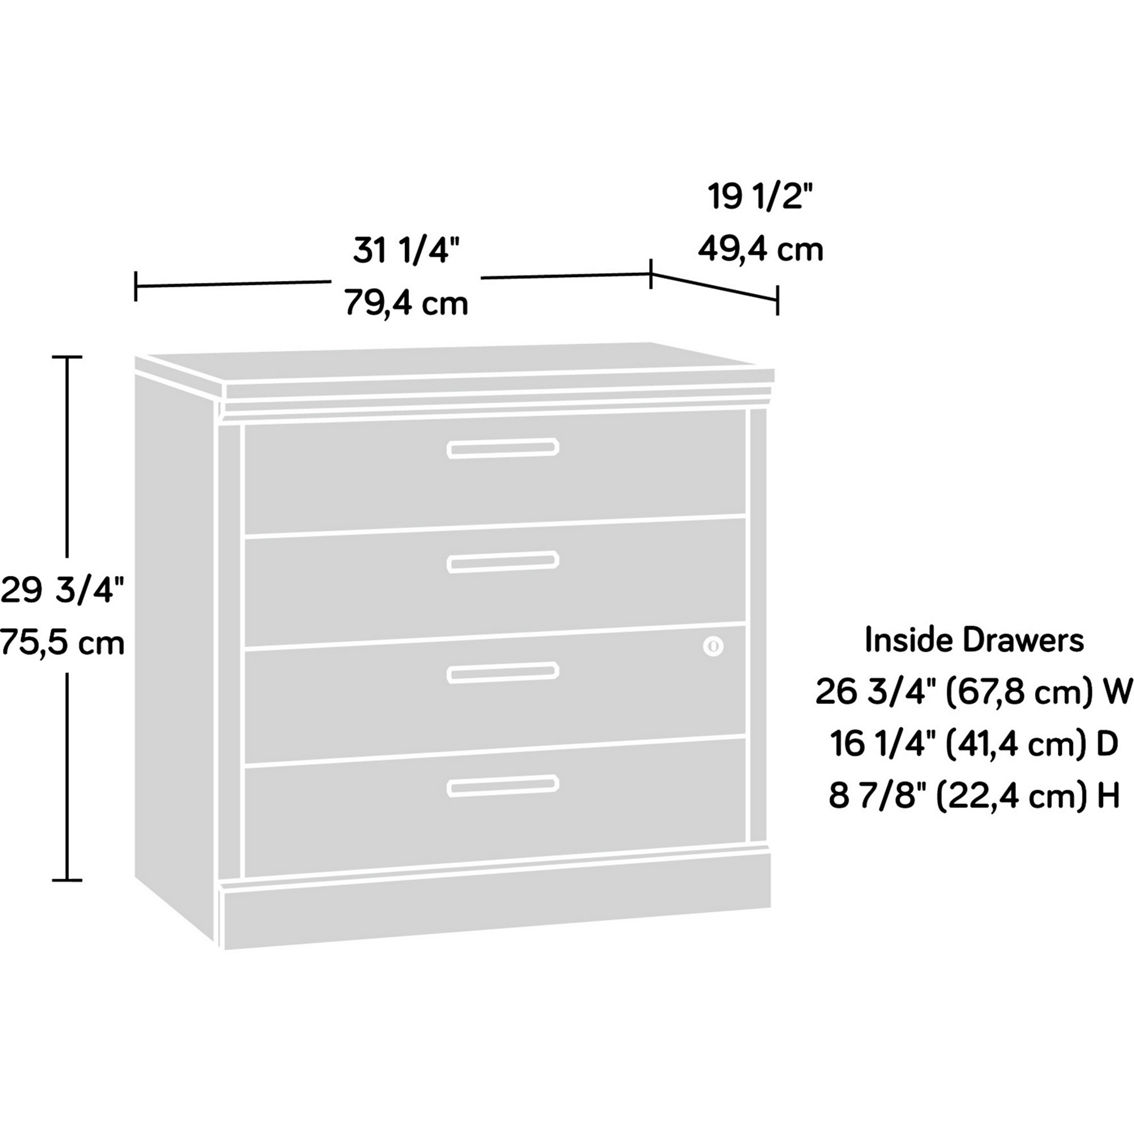 Sauder 2-Drawer Lateral File Cabinet in Pebble Pine - Image 2 of 2